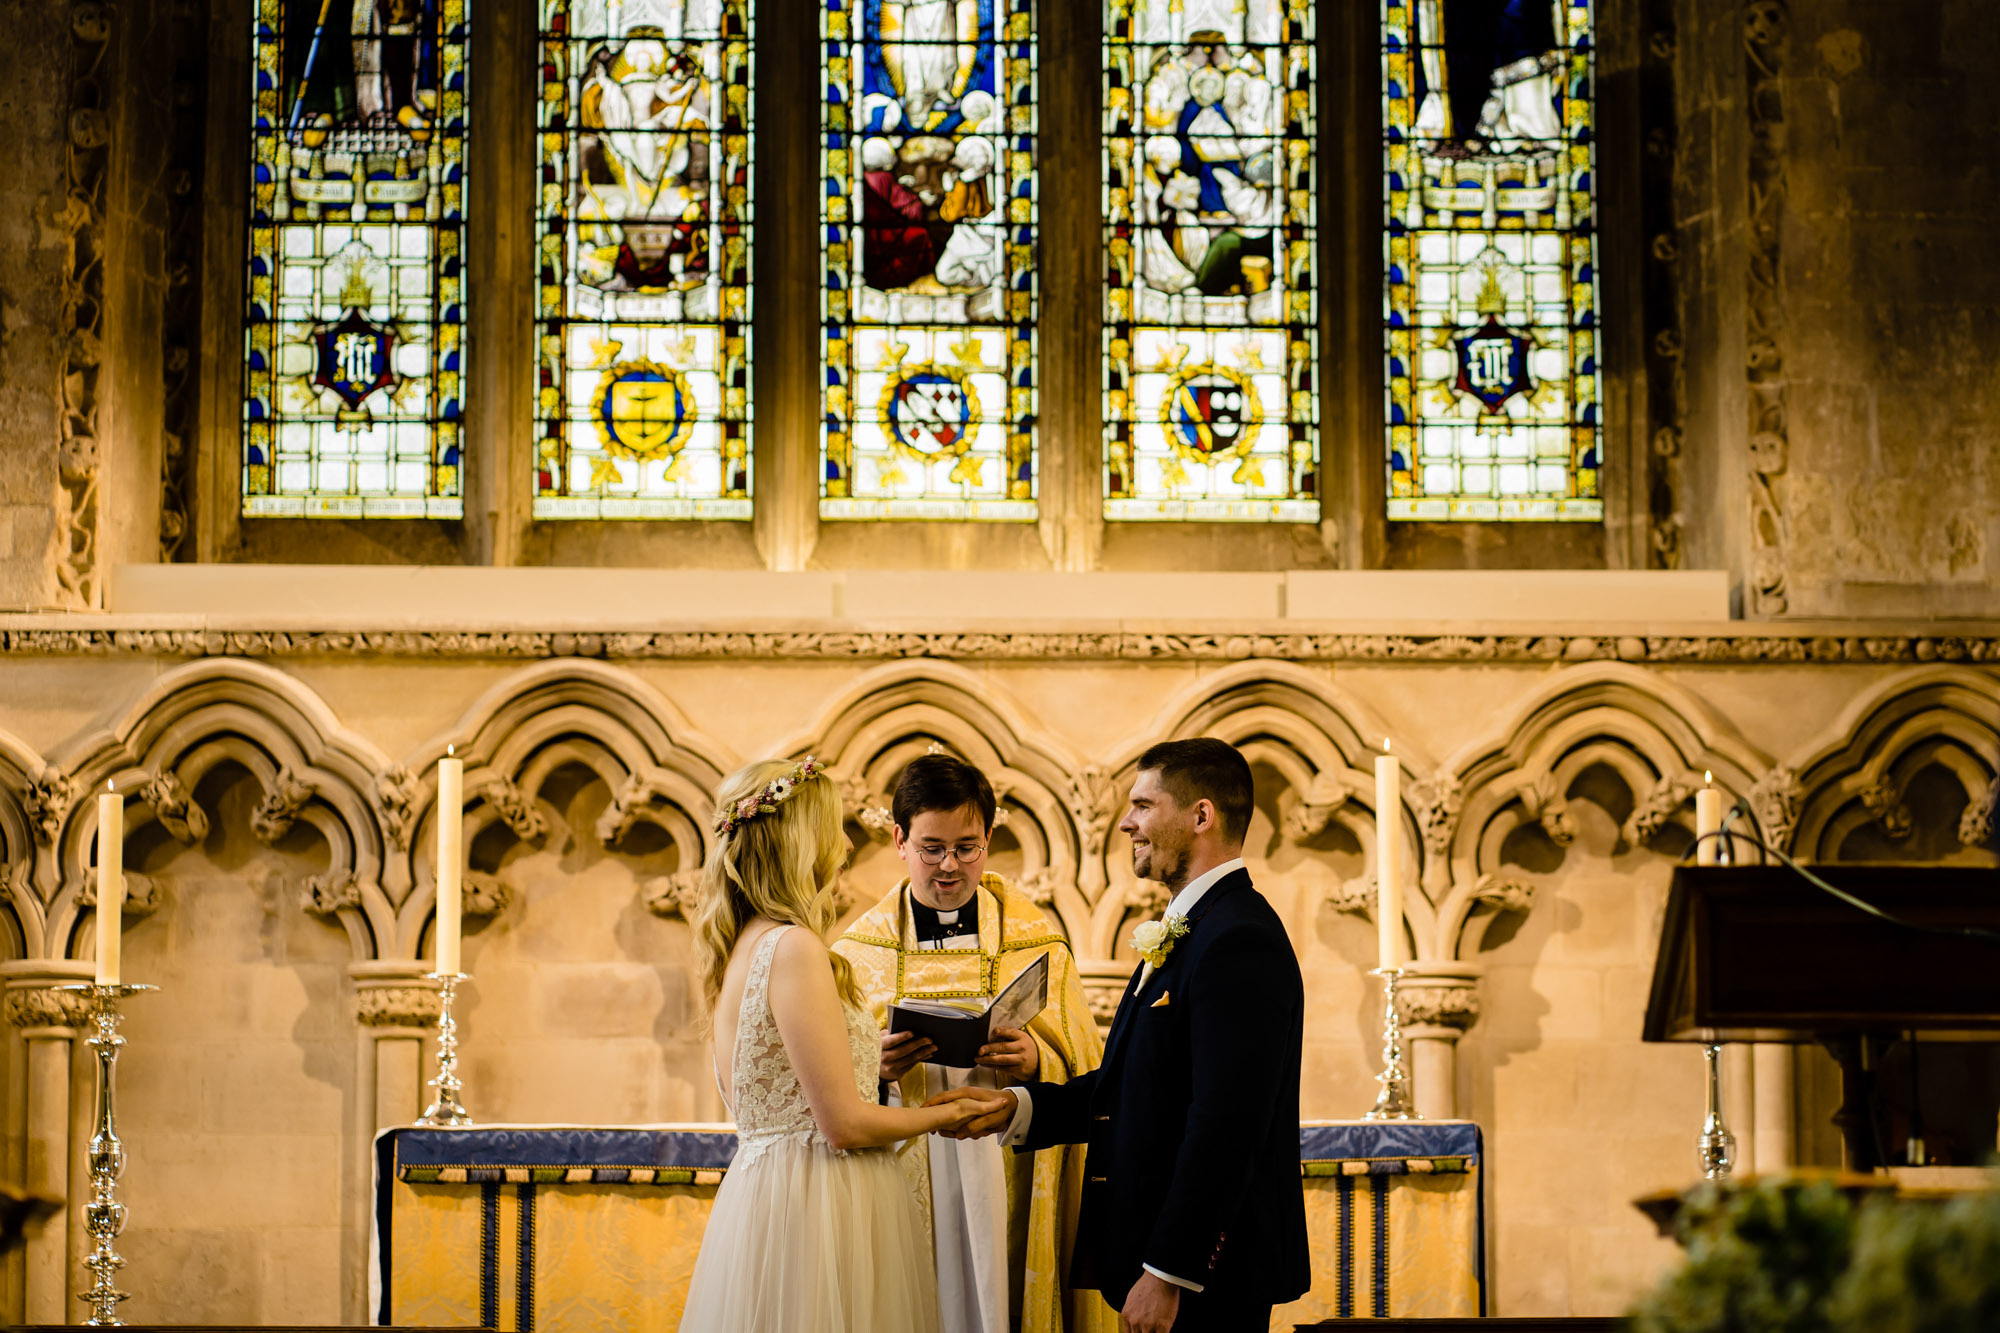 St Albans Cathedral wedding photography, Hertfordshire  